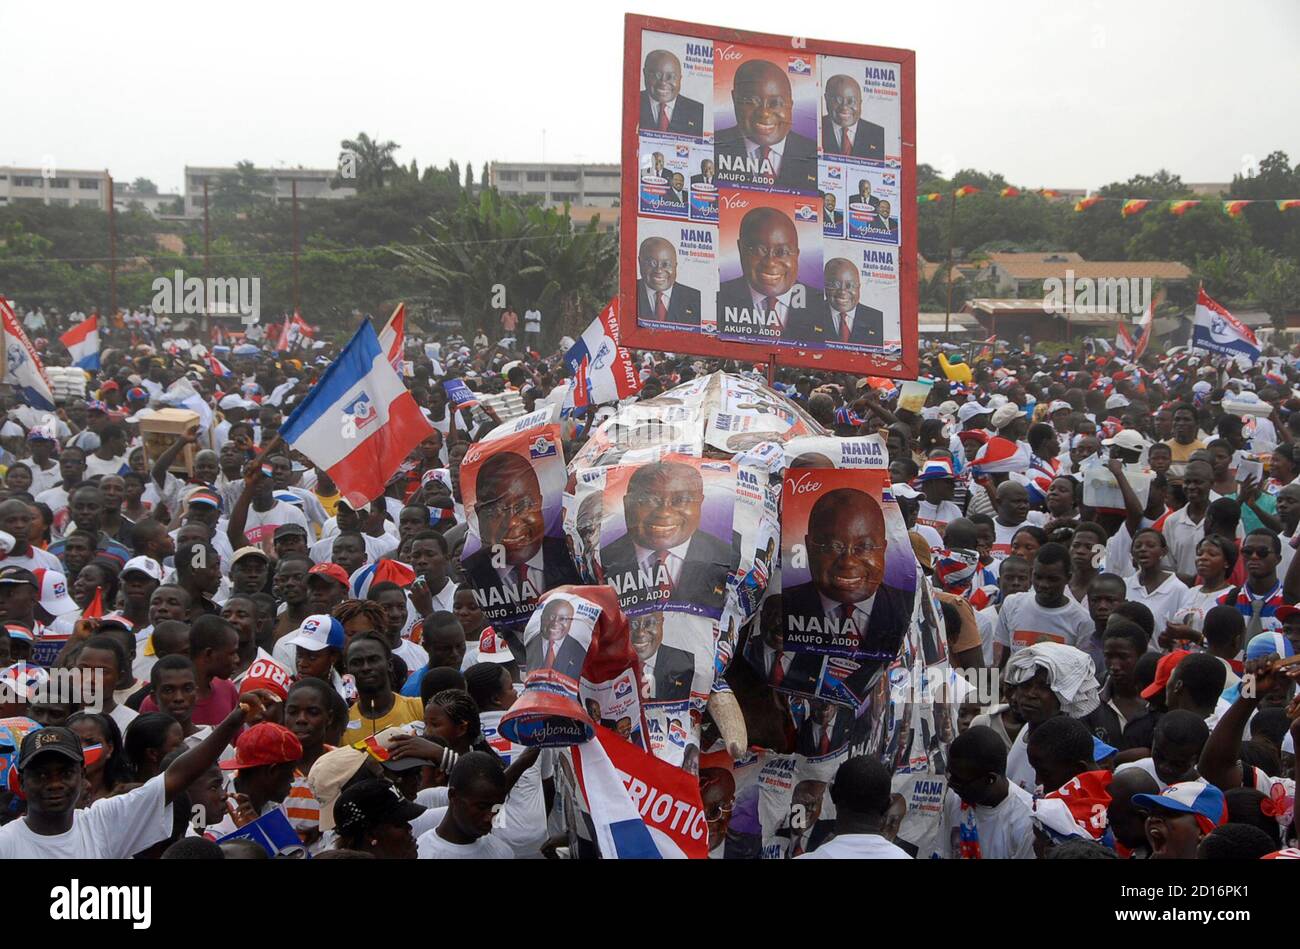 Supporters Of Ghana S Ruling New Patriotic Party Npp Carry Campaign Posters Of Their Presidential Candidate Nana Addo Dankwa Akufo Addo During A Rally At Accra Academy School Park In Accra December 5 08